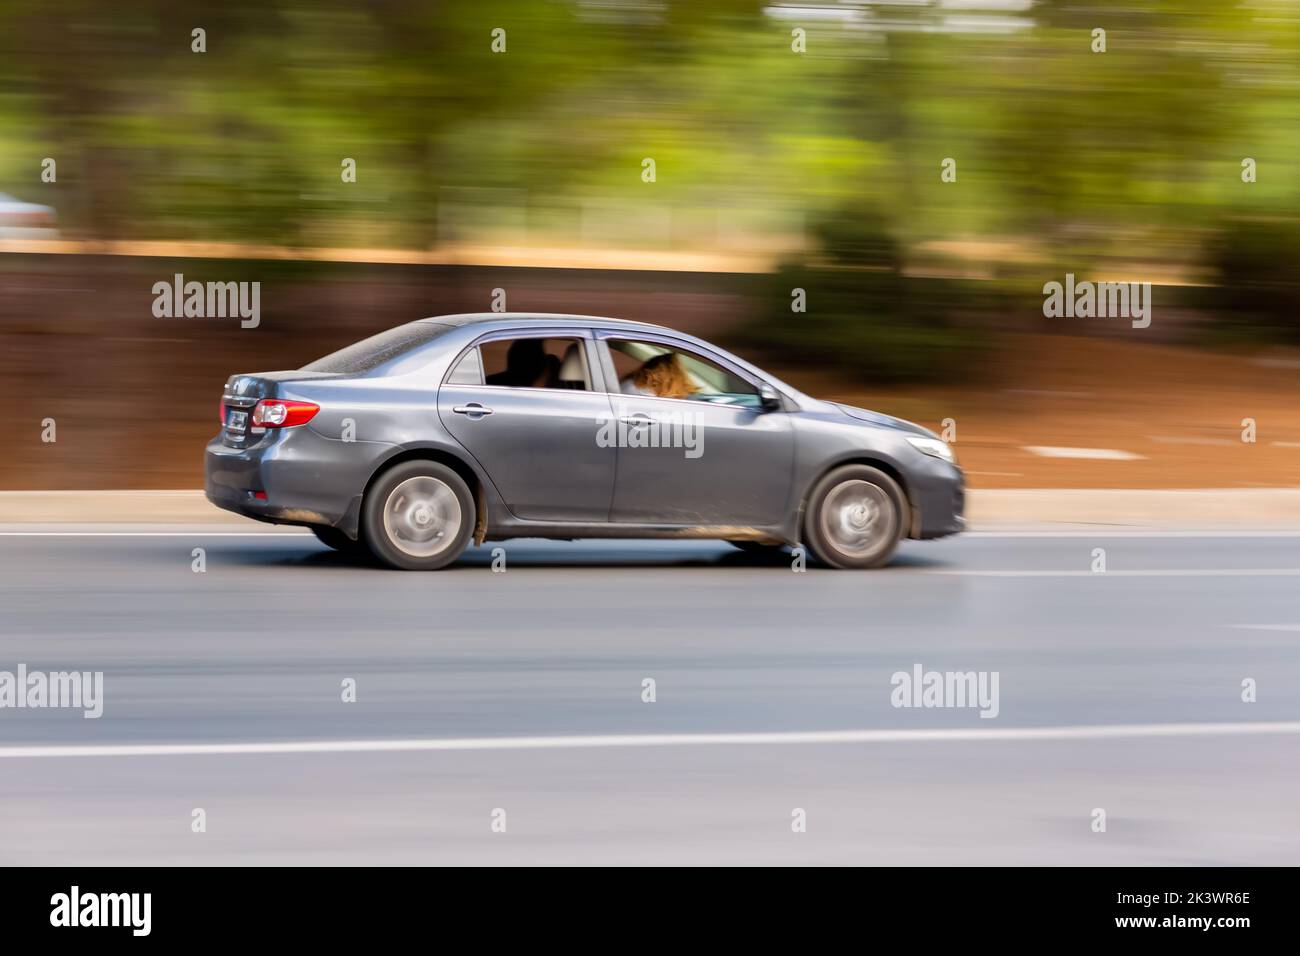 Panning shot of a car driving on a highway. Blurred photo. Stock Photo